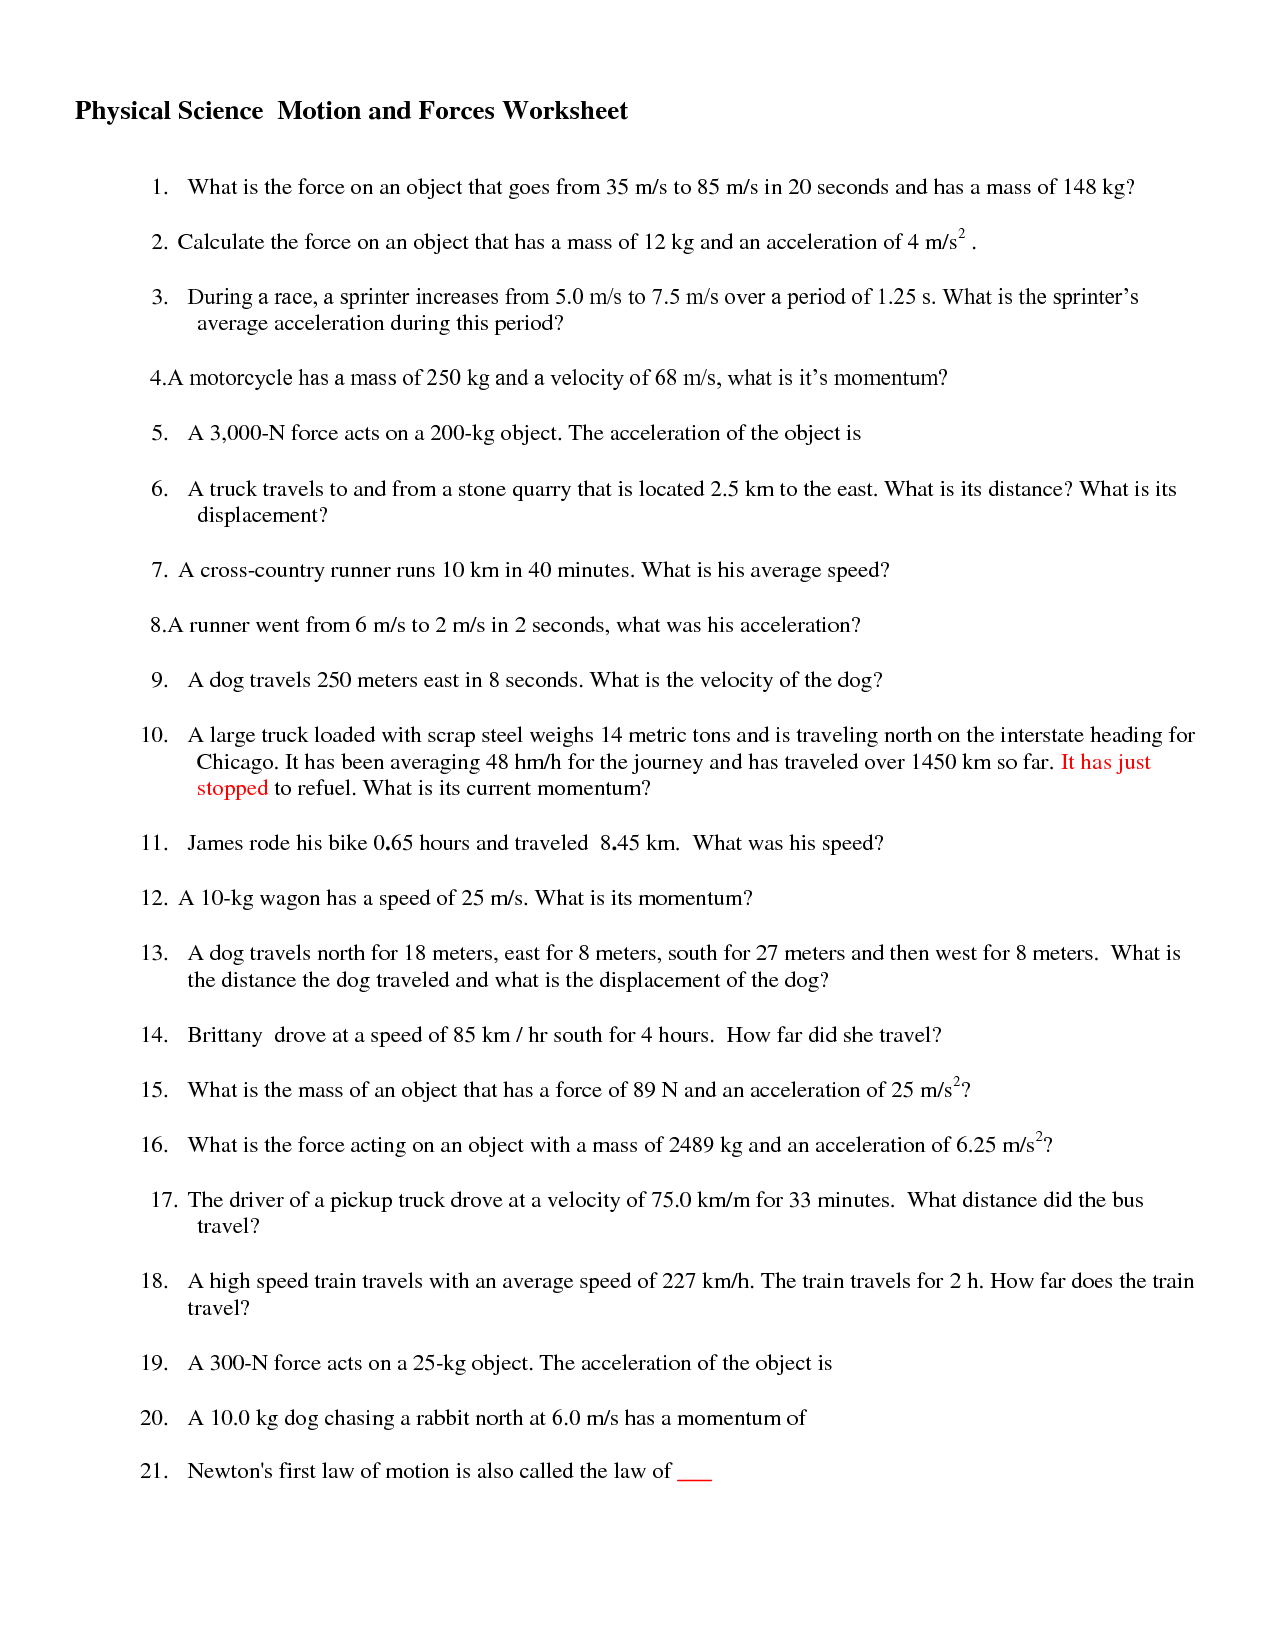 17-best-images-of-force-and-friction-worksheets-elementary-force-and-friction-worksheets-5th